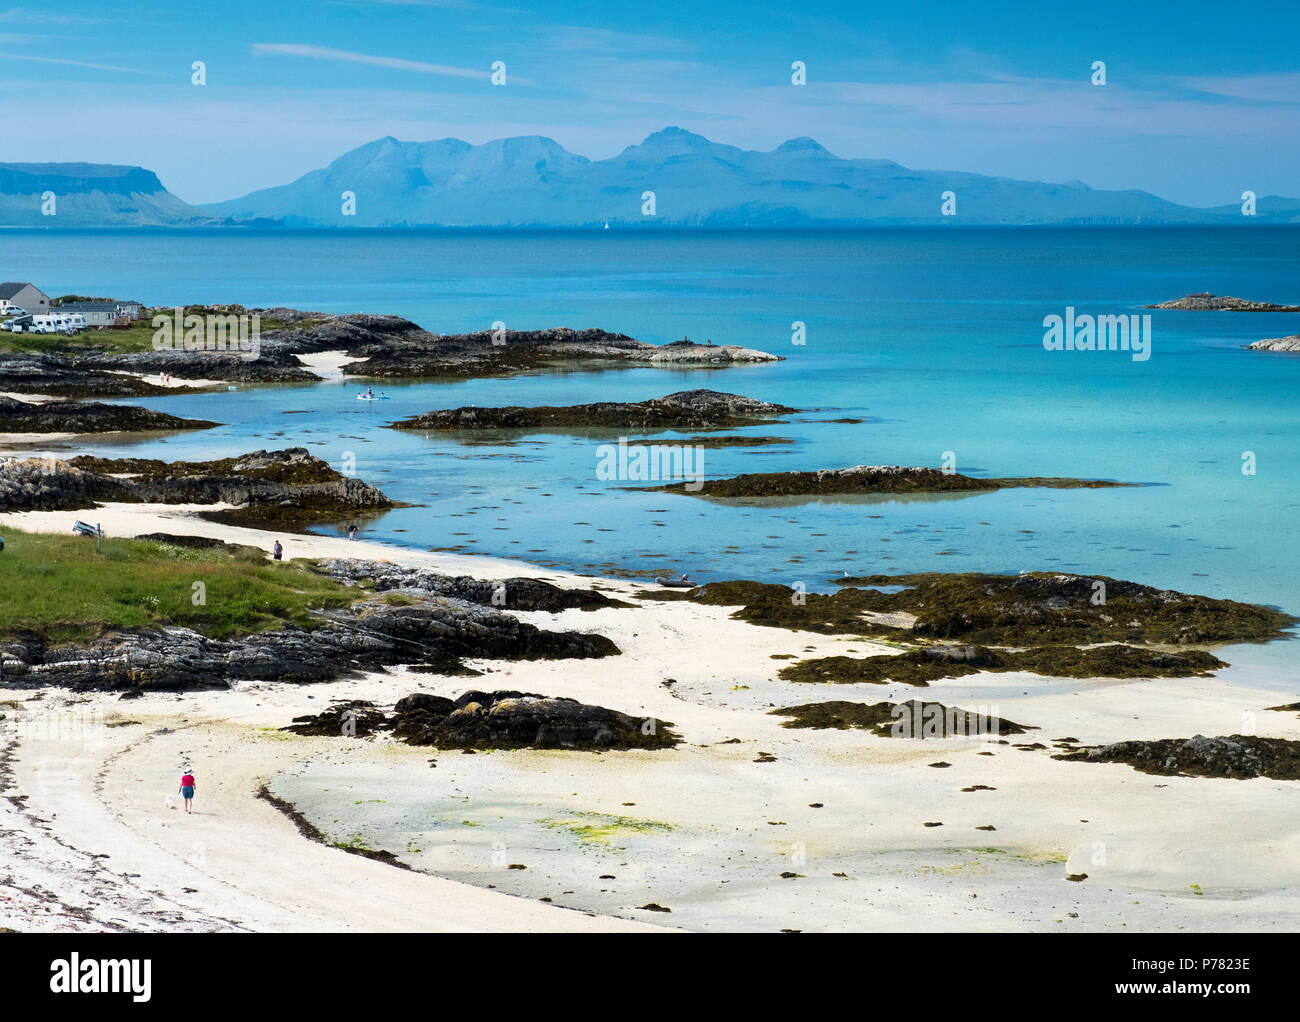 A sandy beach at Traigh near Arisaig with the islands of Eigg and Rum in the distance. Stock Photo